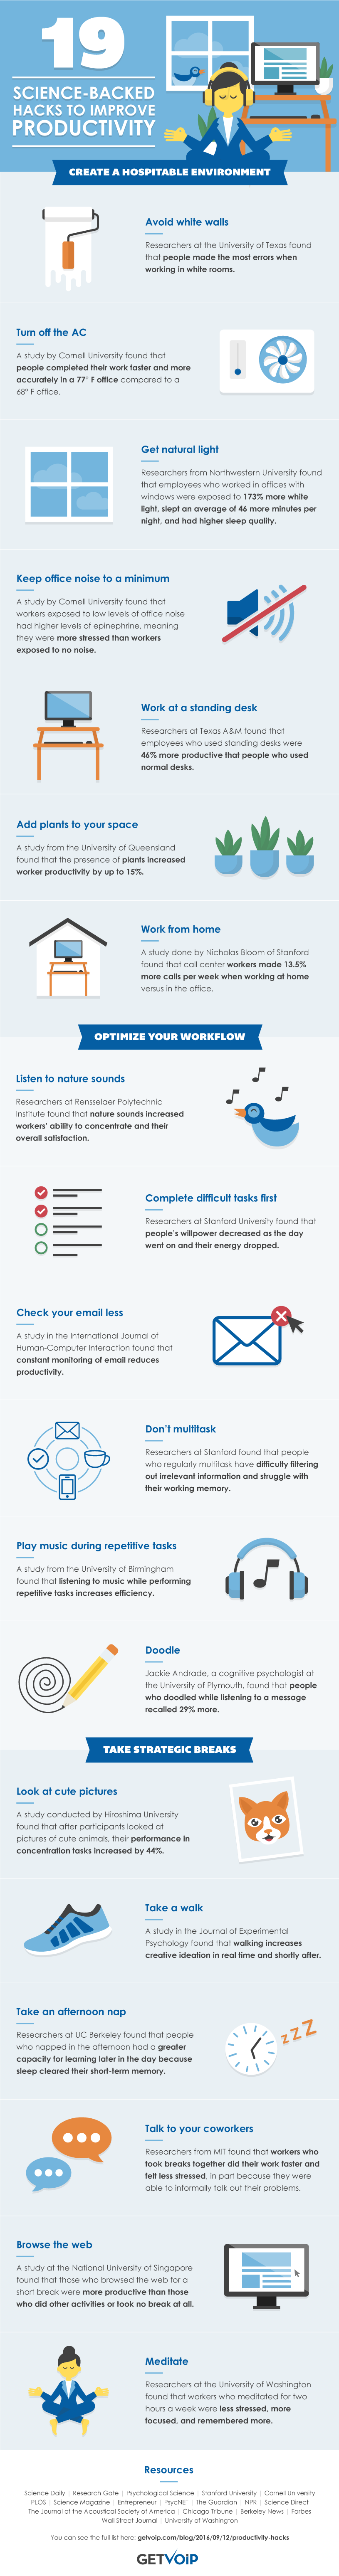 19 Simple Tips to Increase Productivity at the Office - #infographic